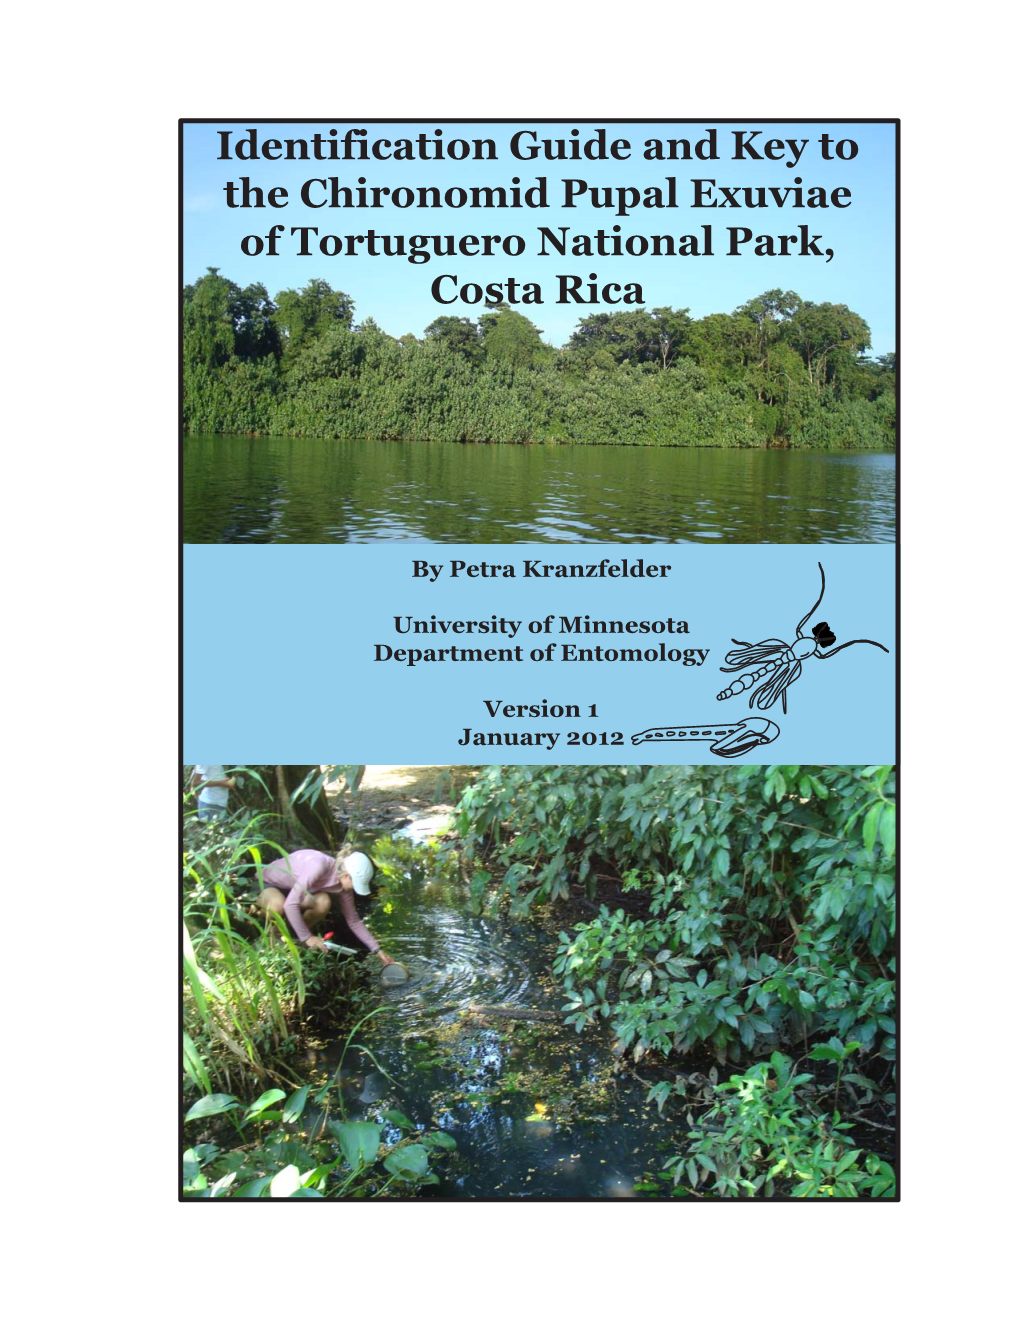 Identification Guide and Key to the Chironomid Pupal Exuviae of Tortuguero National Park, Costa Rica